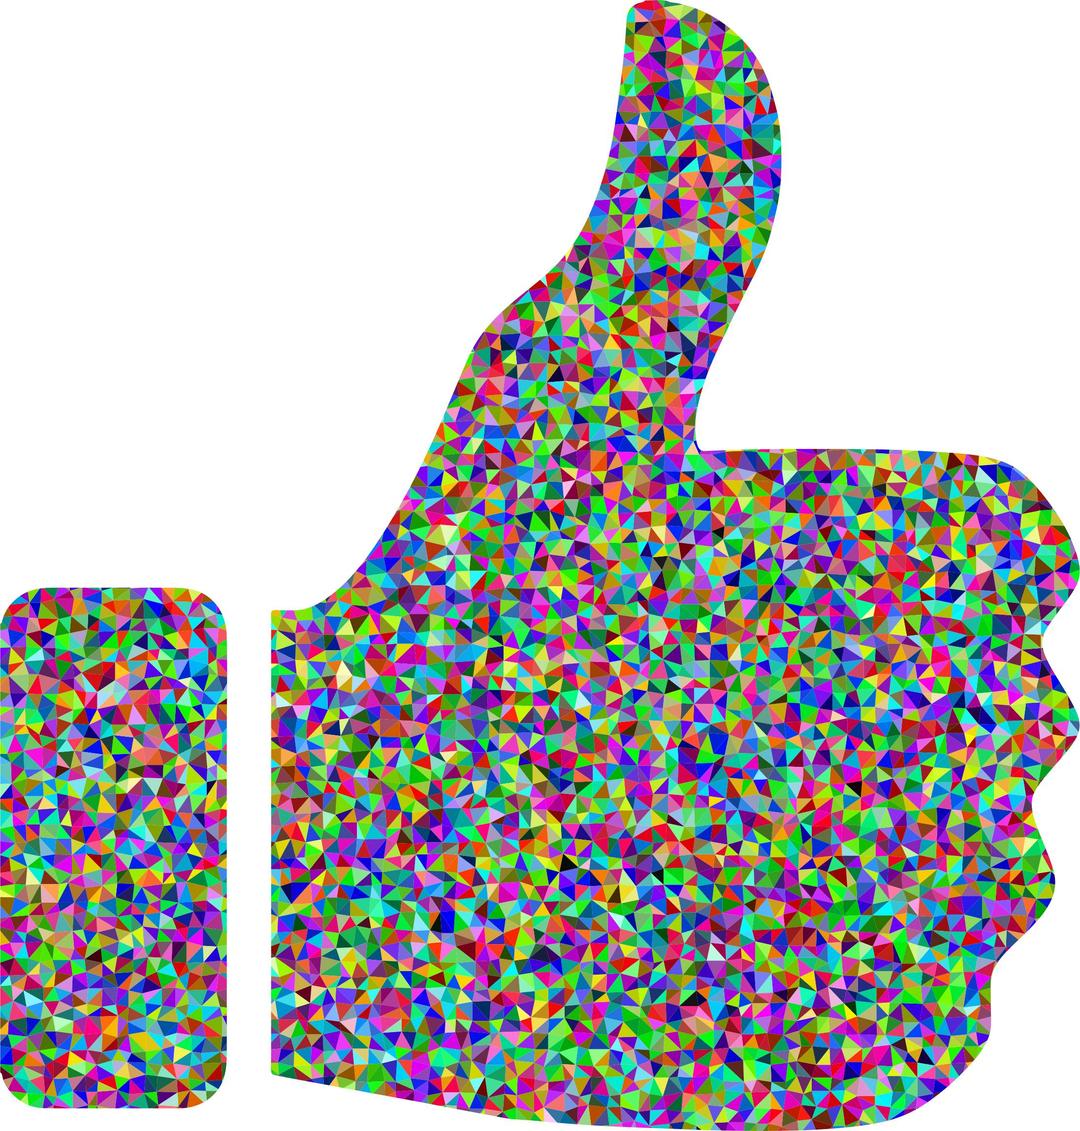 Prismatic Low Poly Thumbs Up High Detail png transparent